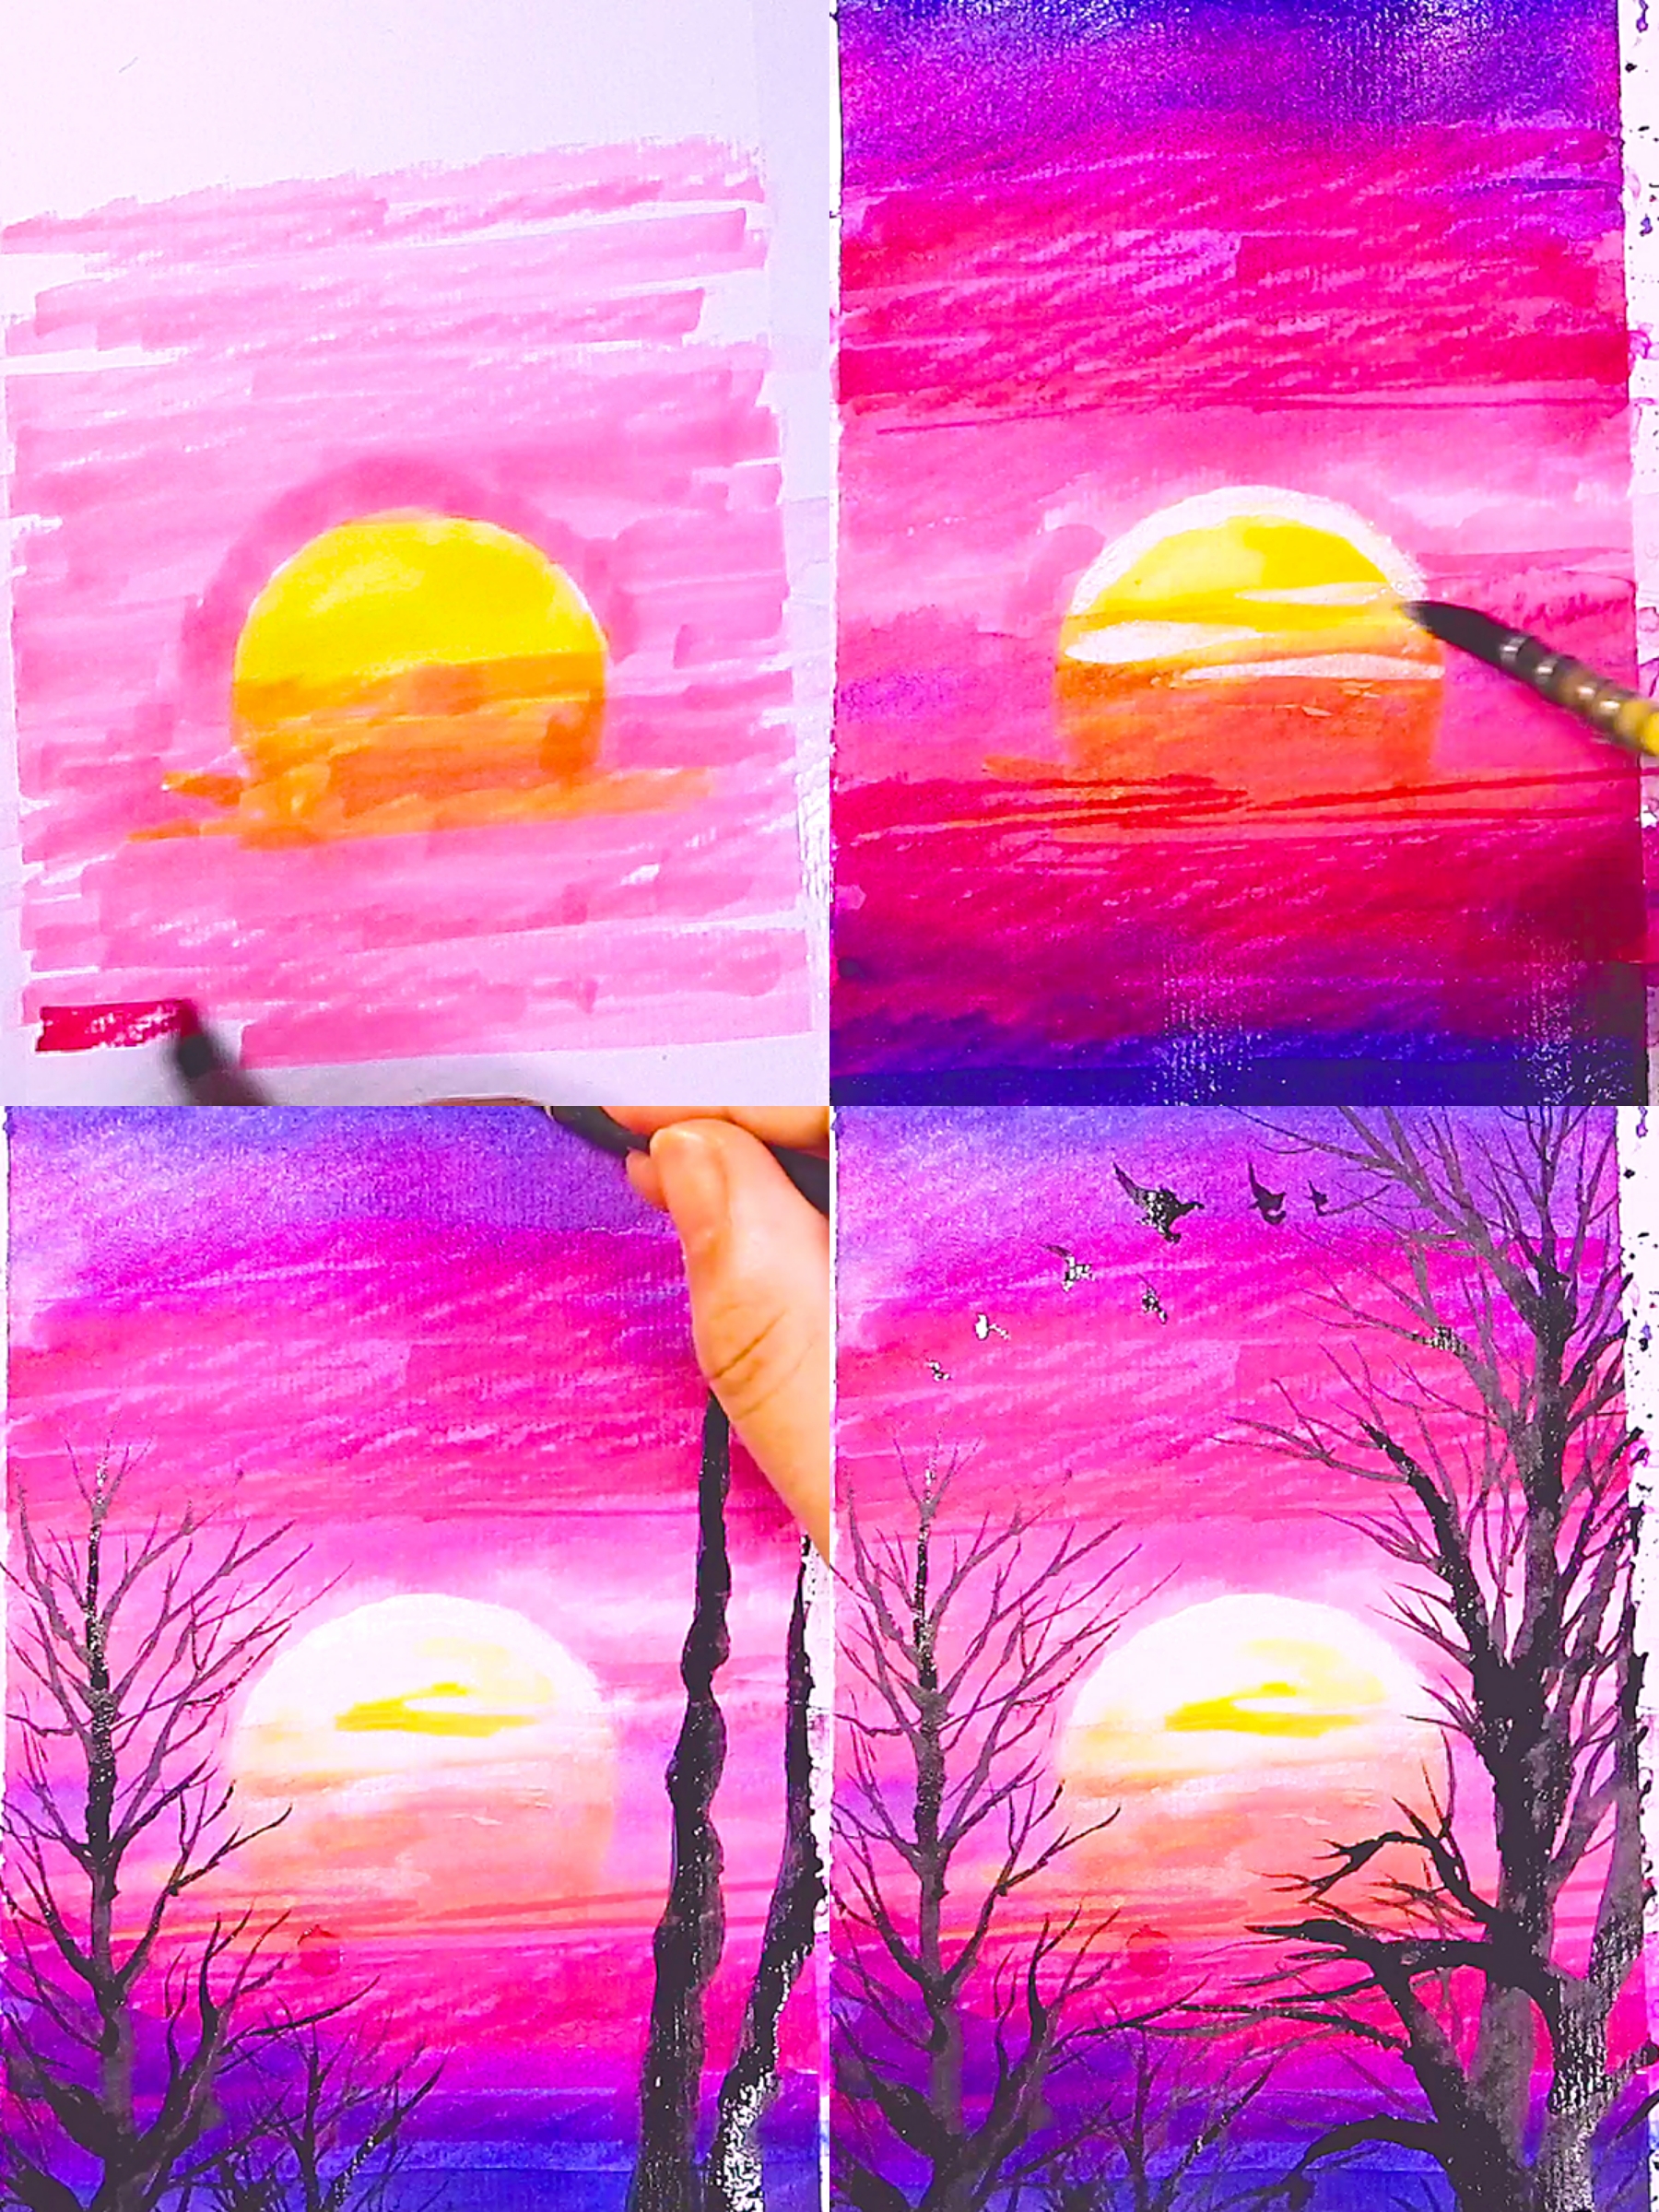 2 How to draw watercolor pink style sunset landscape, come to see my online class